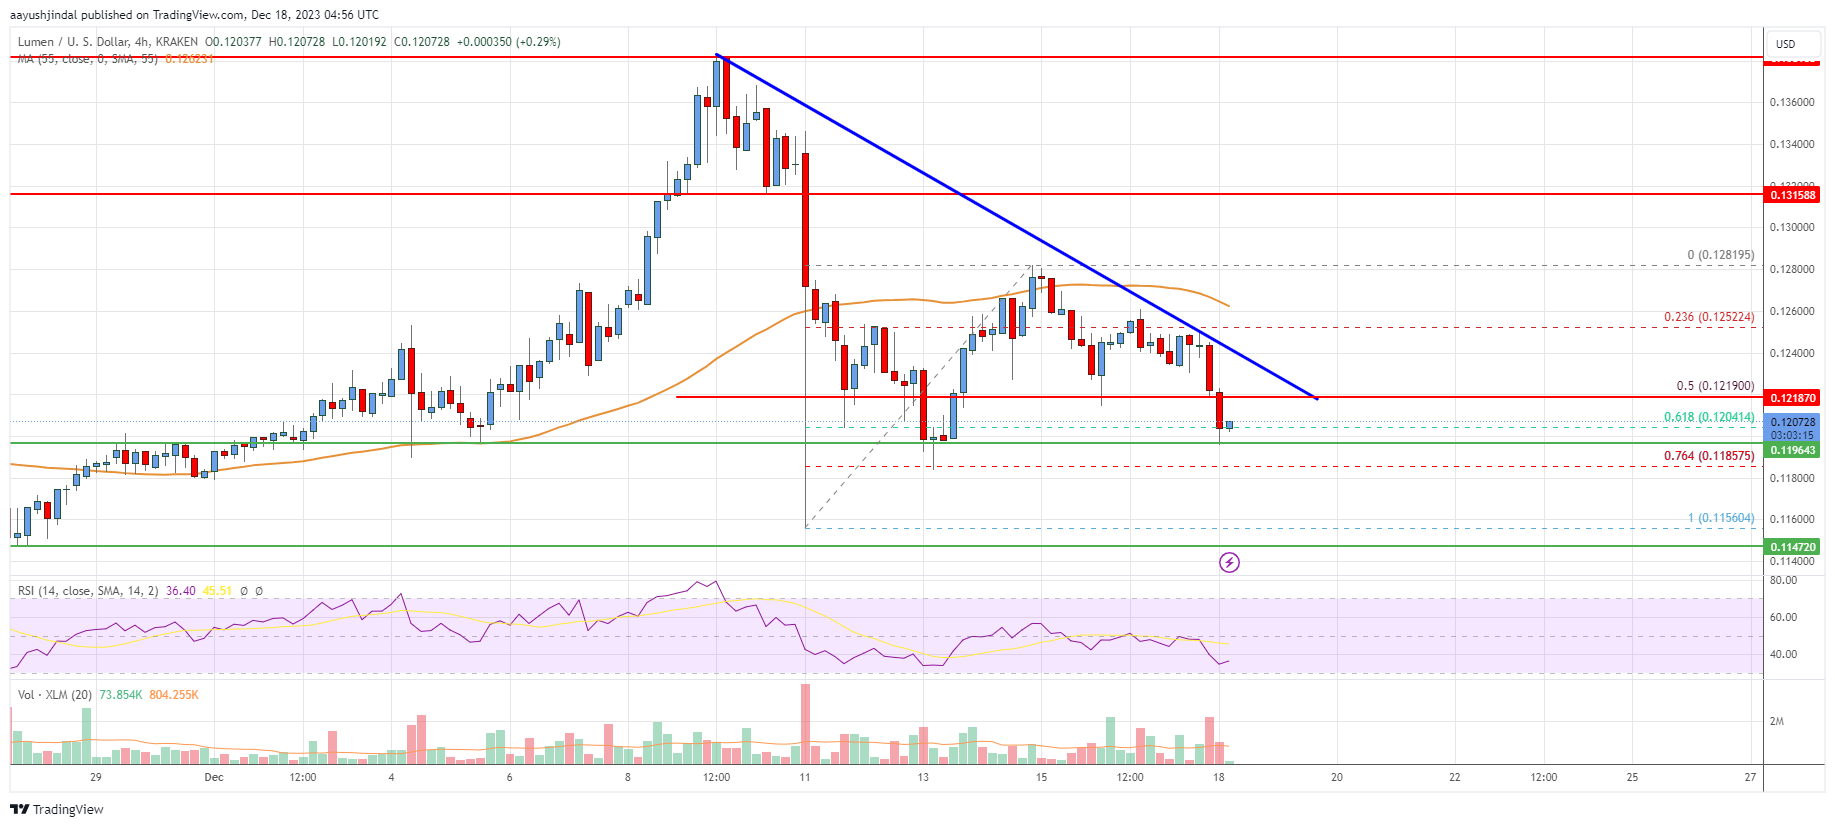 Stellar Lumen (XLM) Price Could Accelerate Lower Unless It Clears This Hurdle